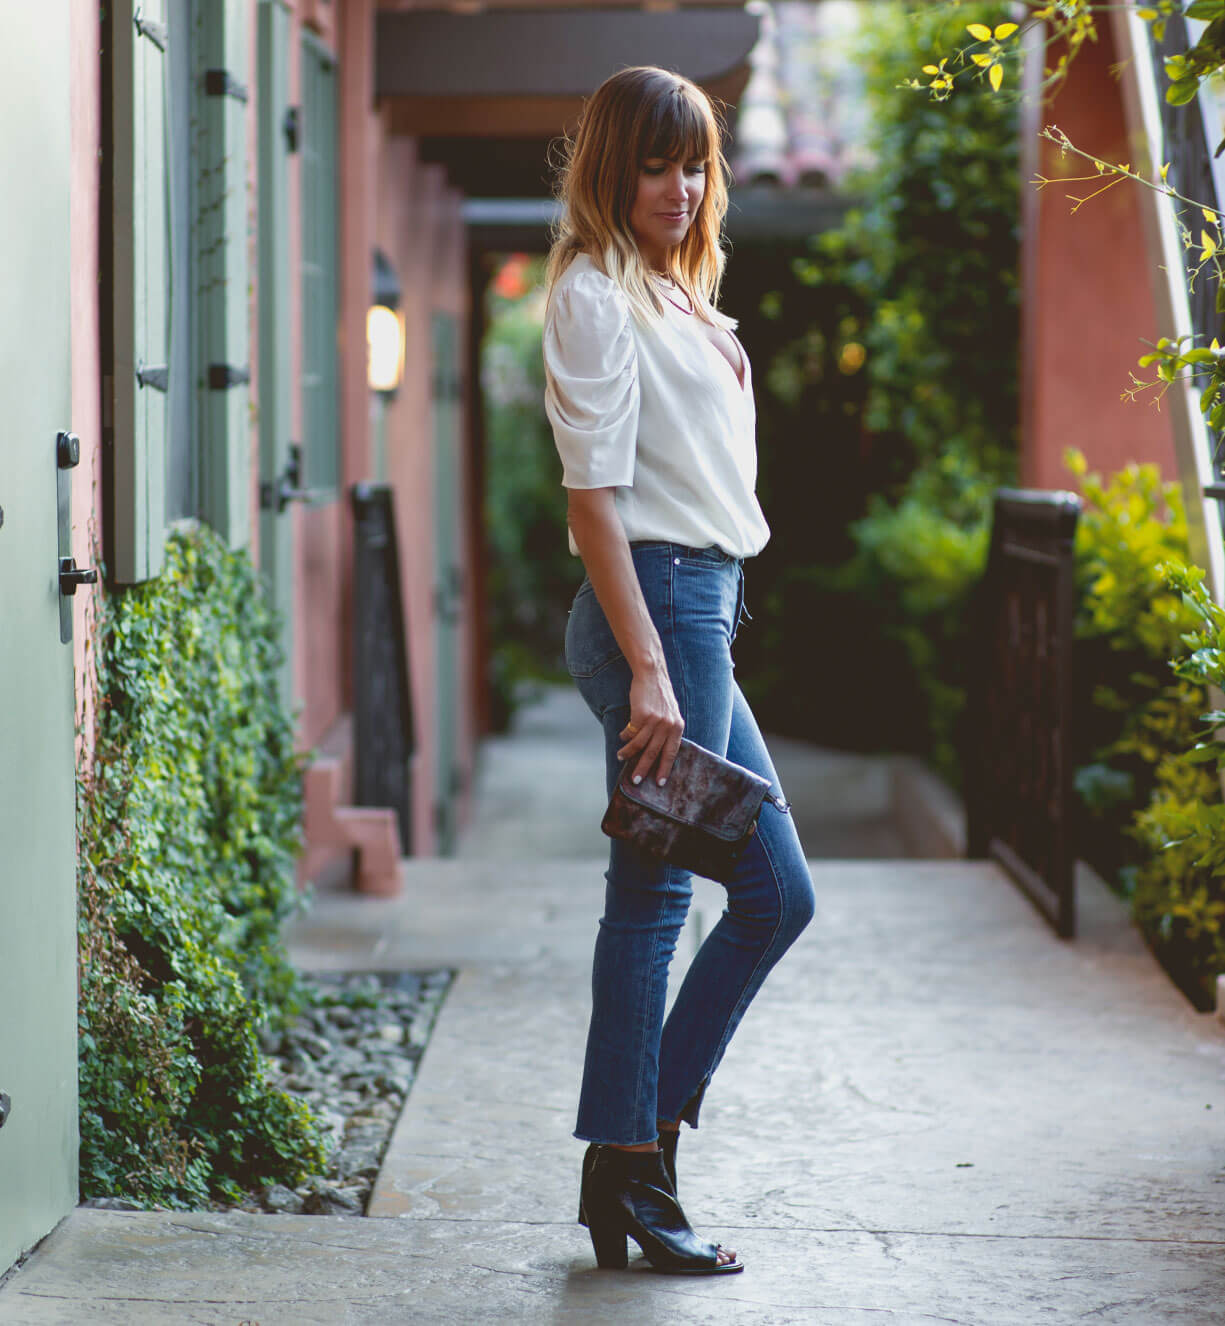 A woman wearing jeans, white blouse and a Bed Stu black and brown Ziggy clutch.